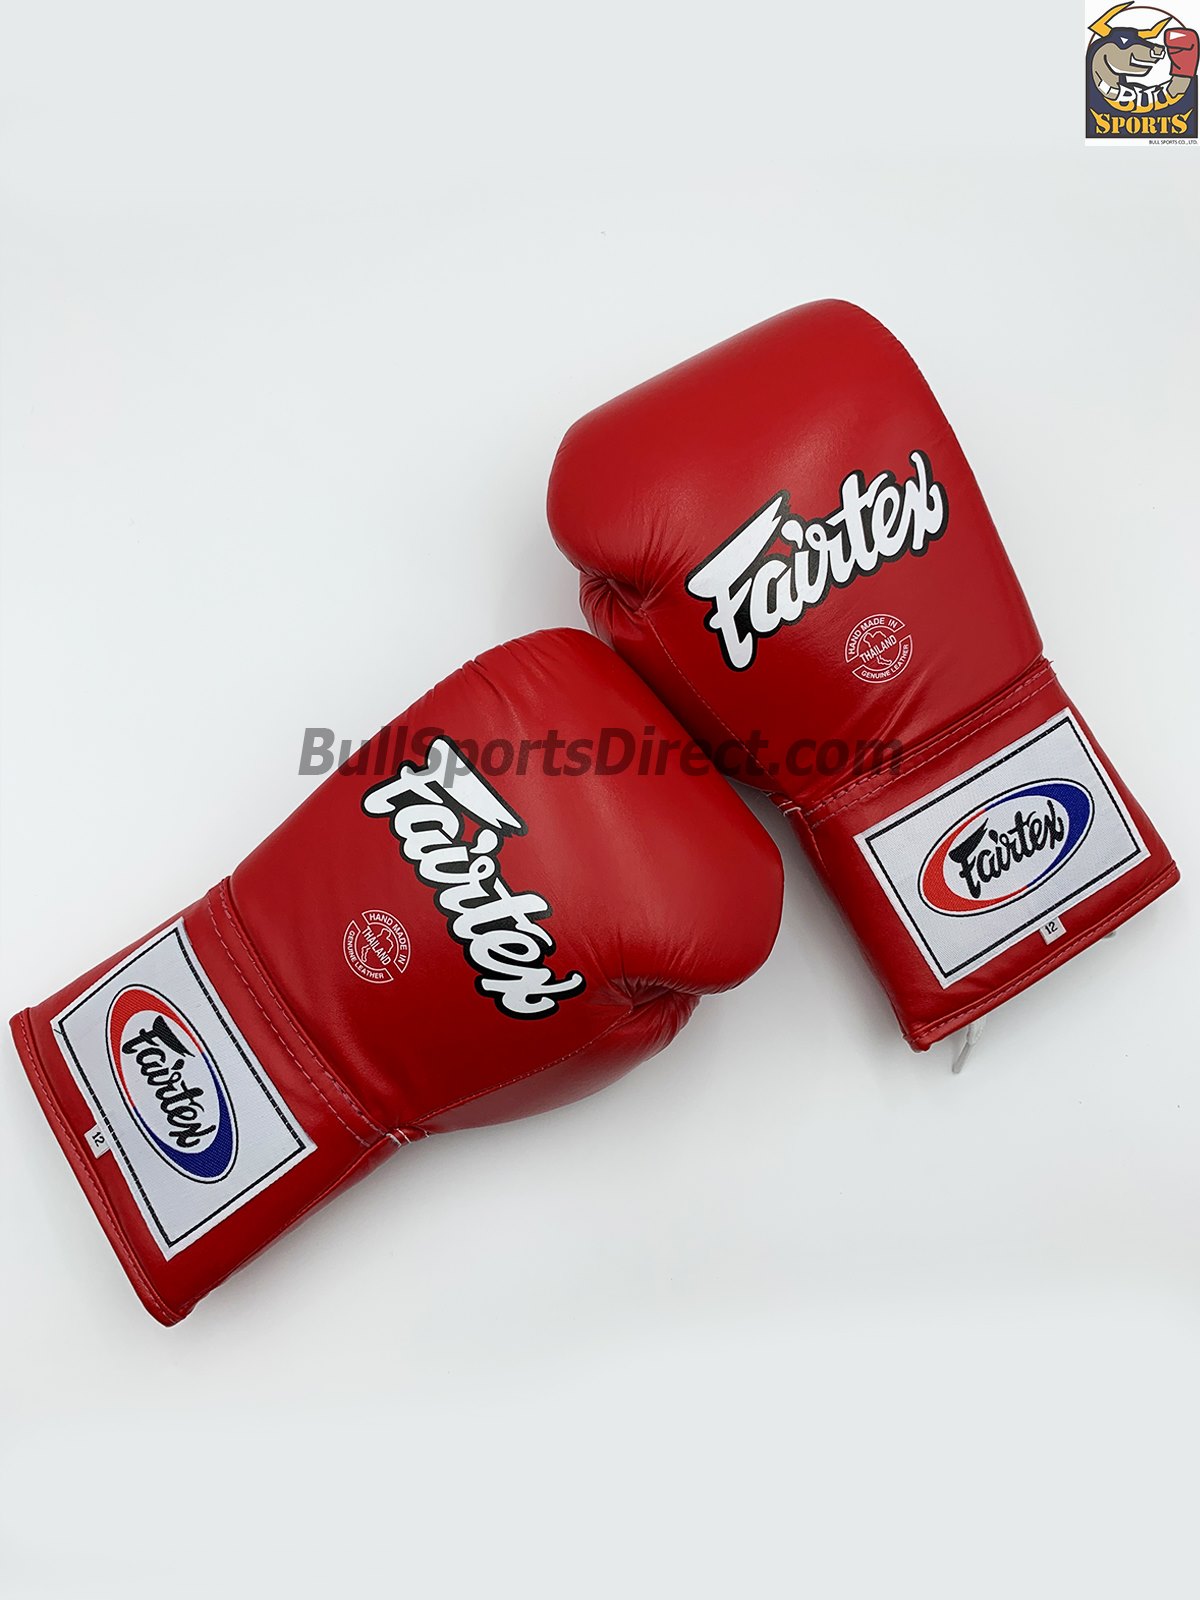 Details about   FAIRTEX BGL6 MUAY THAI KICK BOXING GLOVES Fight Training SPARRING PRO Sporting 